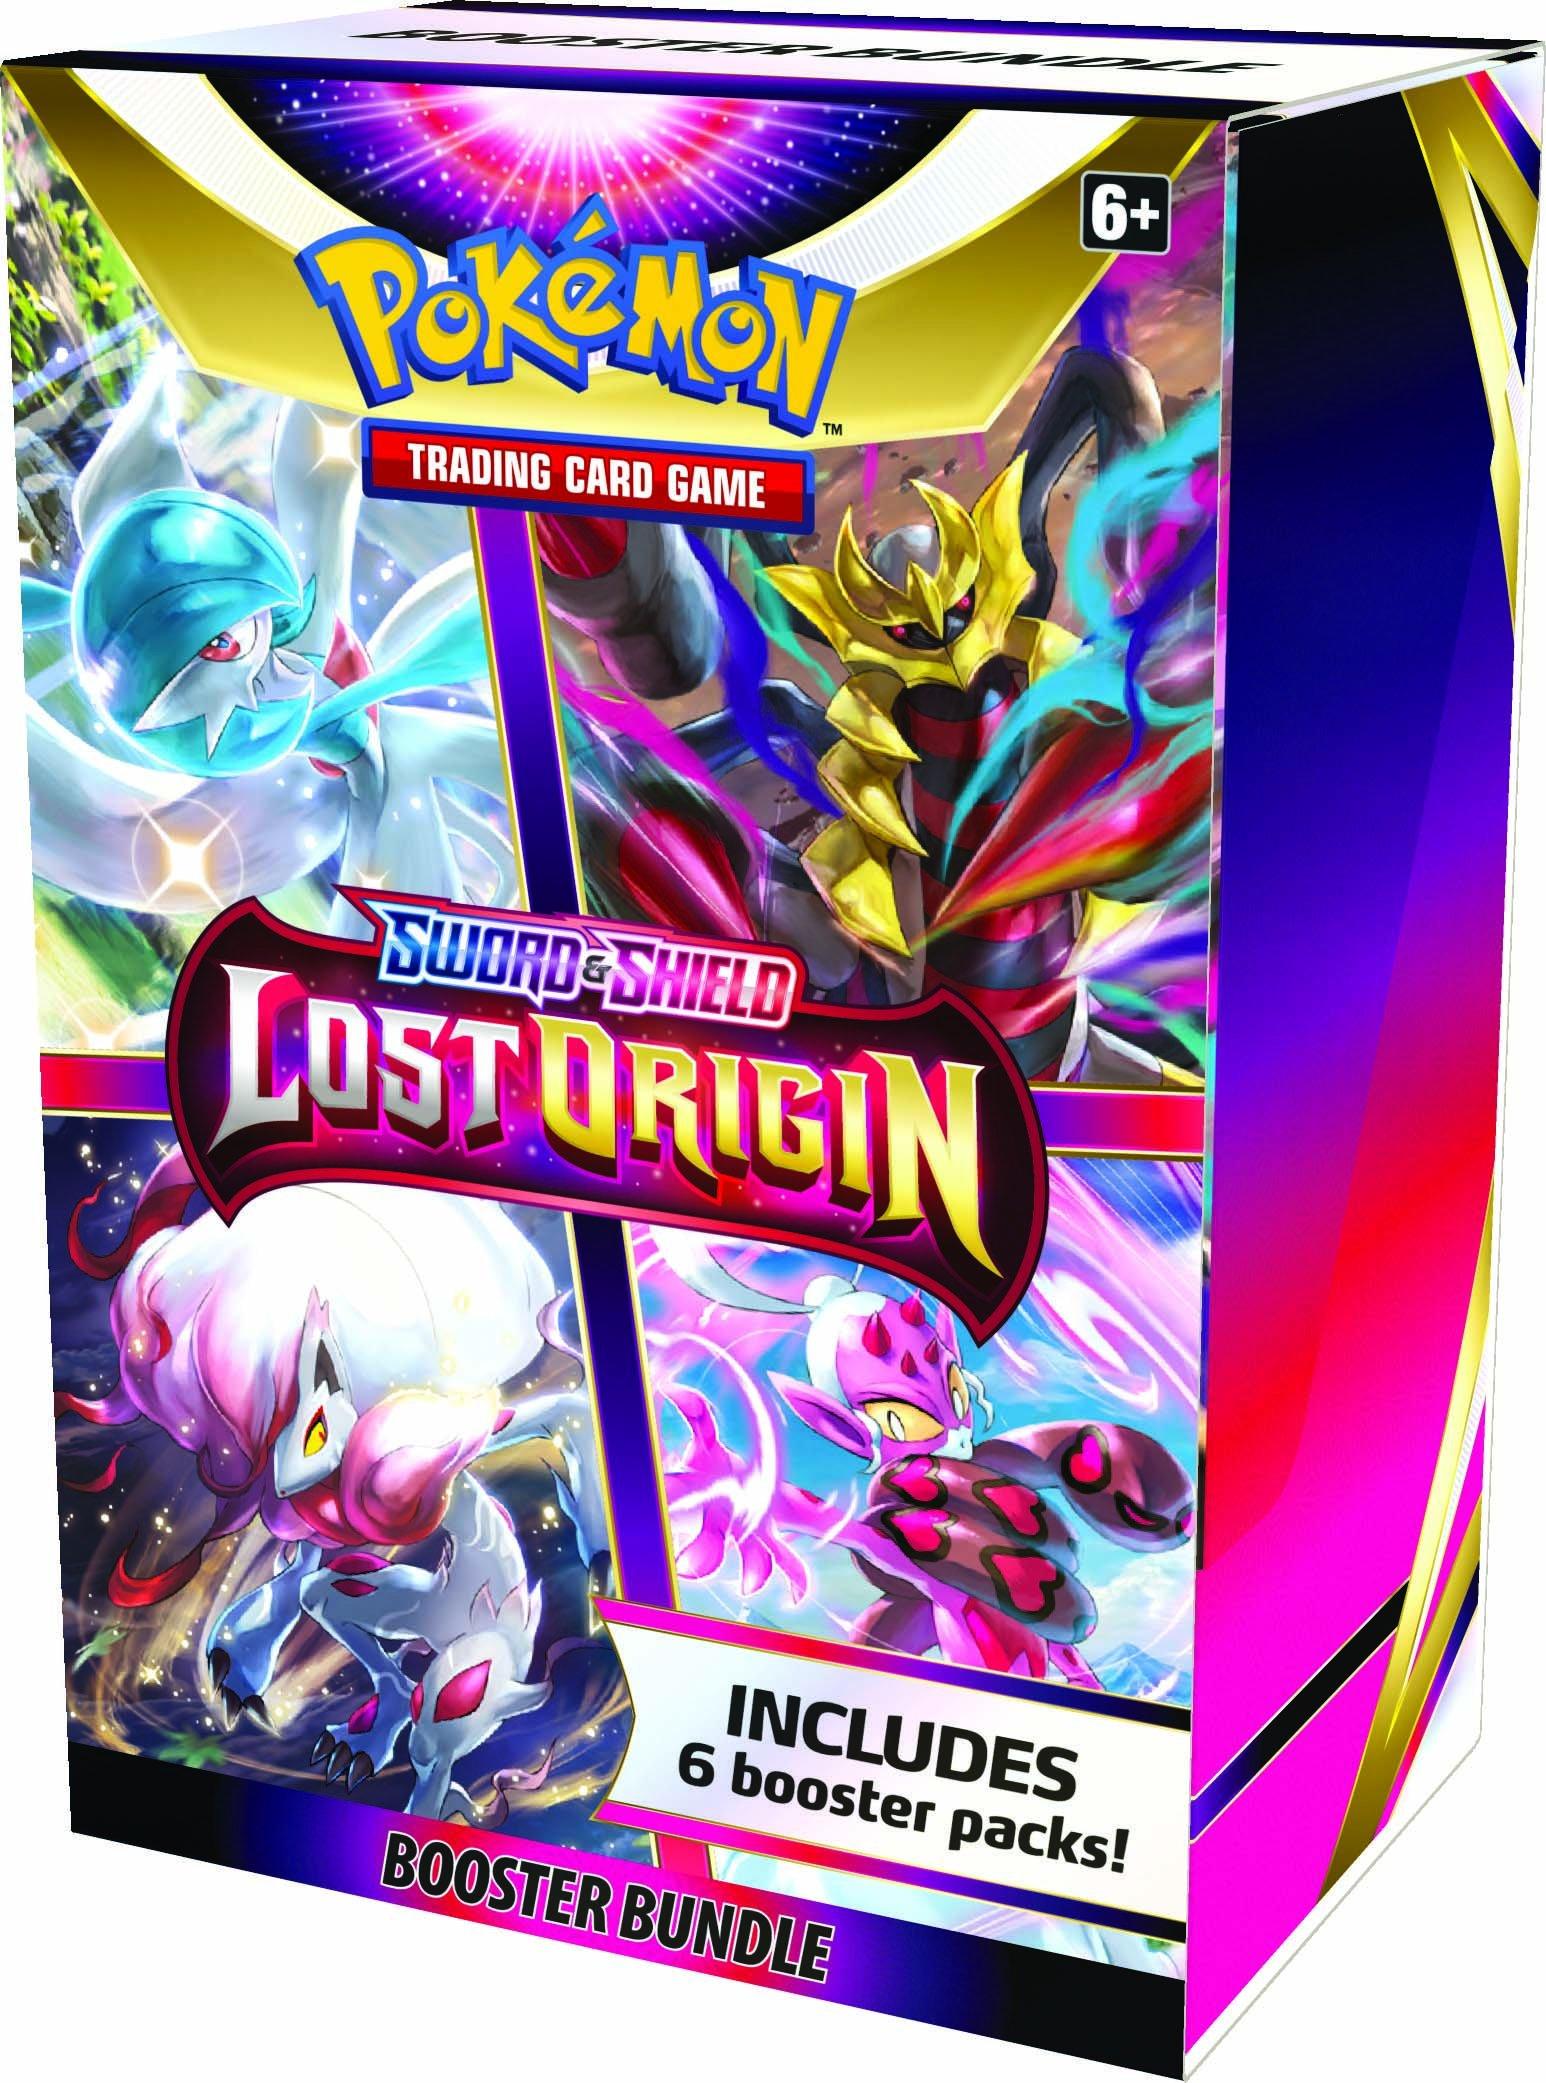 Pokemon Trading Card Game Lost Origin Booster Bundle Includes 6 Packs